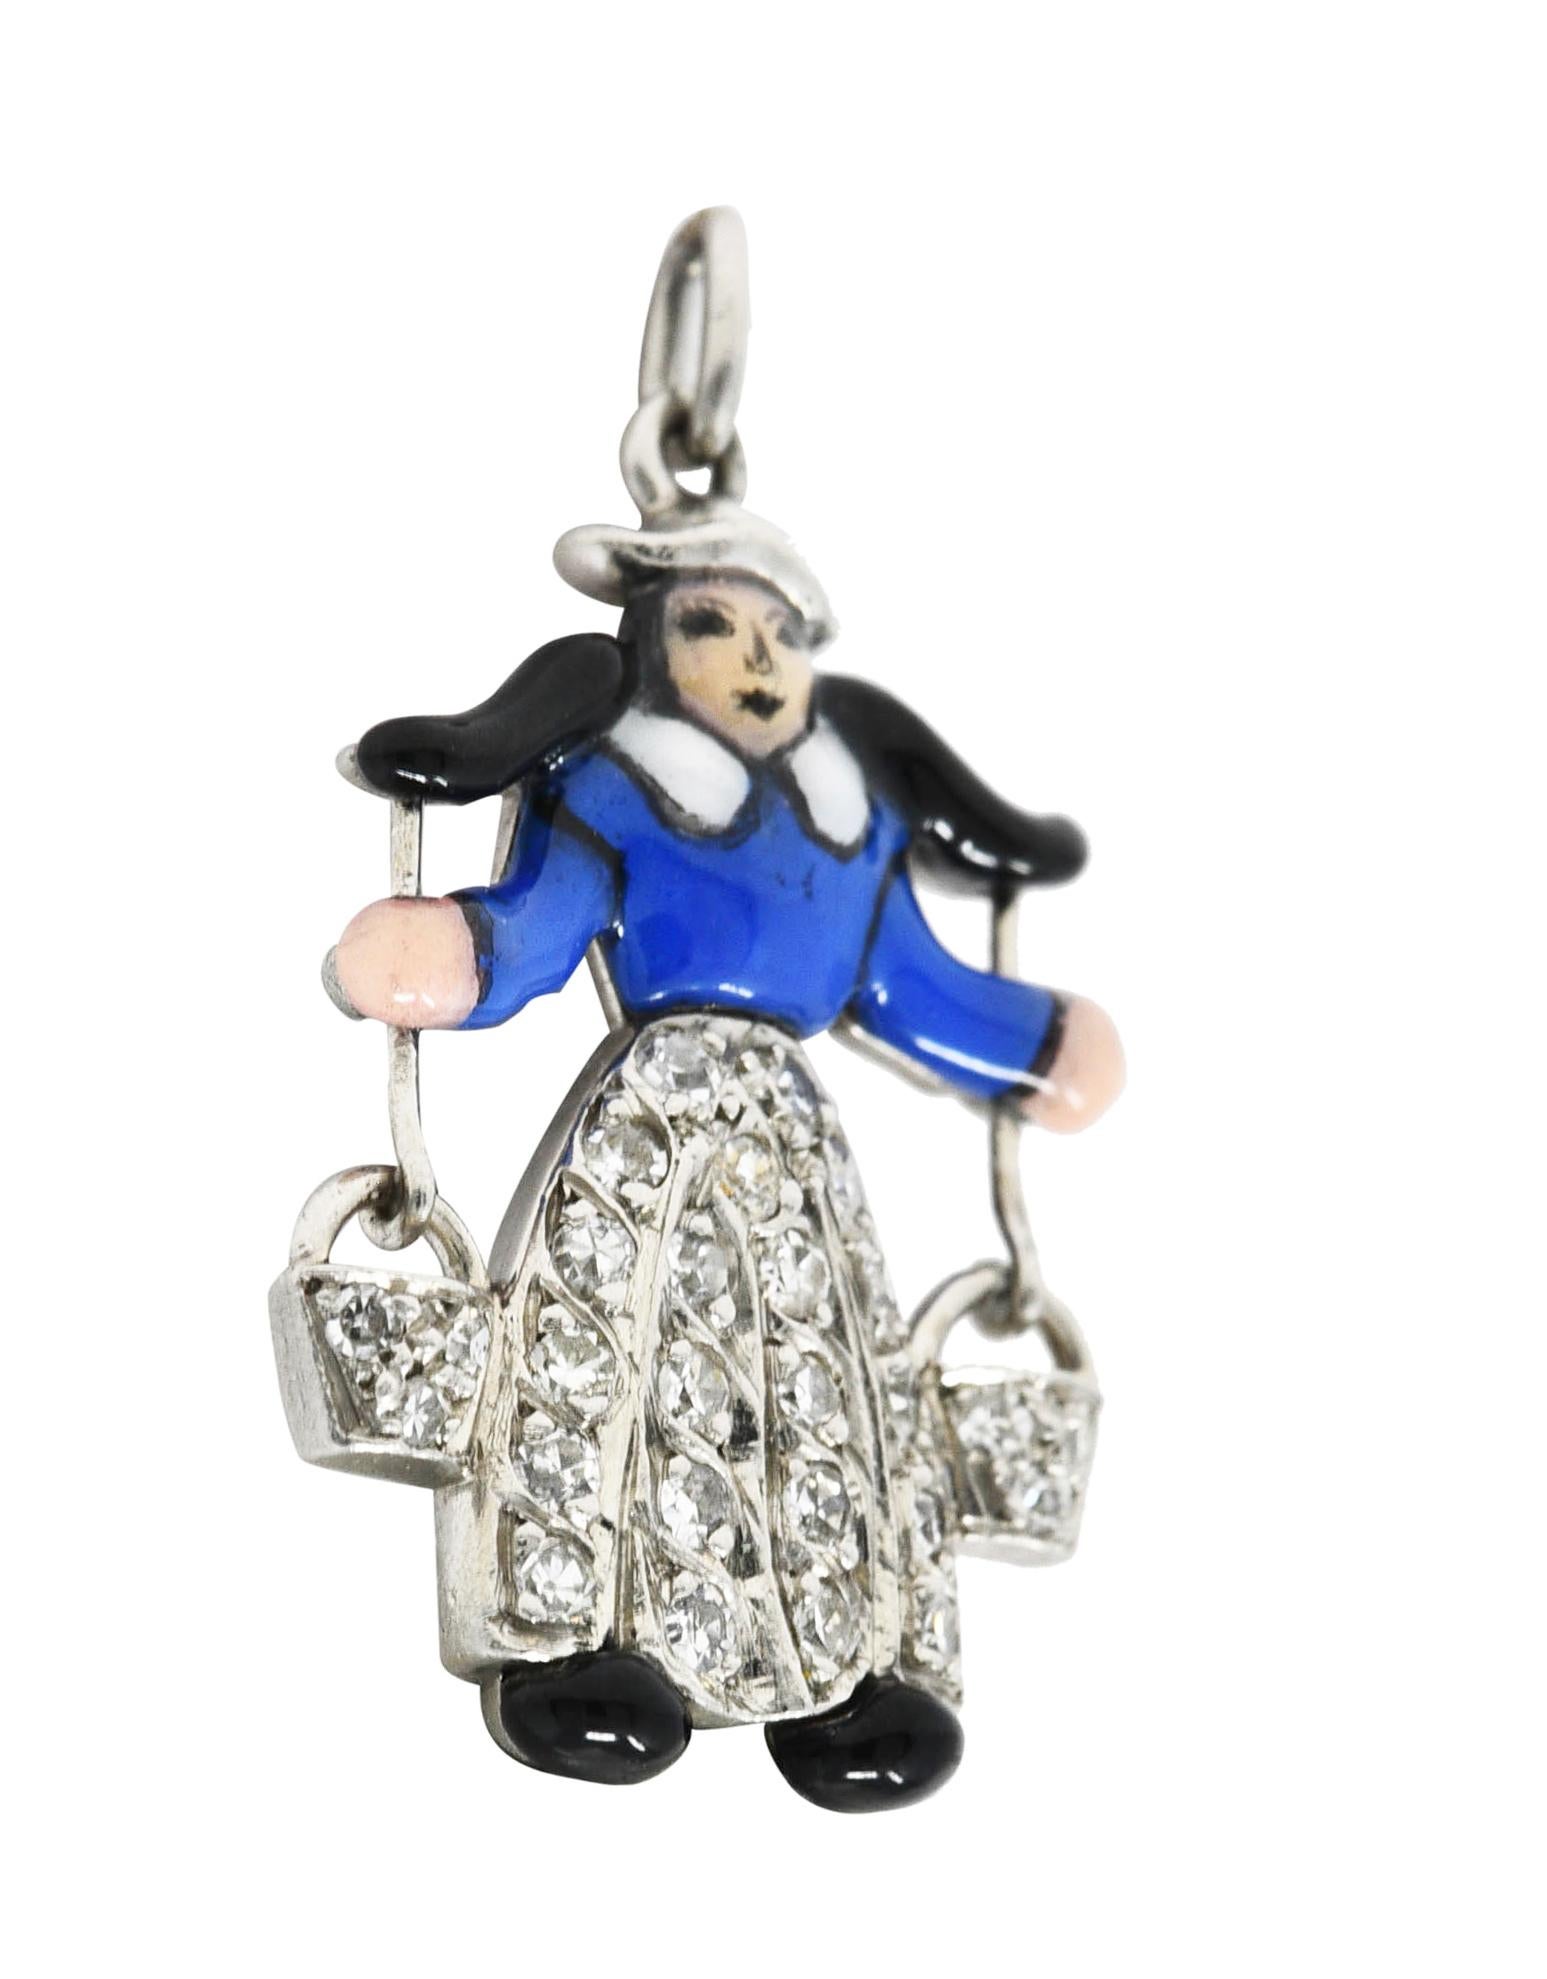 Designed as an enamel milkmaid in traditional Dutch clothing carrying yolk style buckets. Opaque glossy black, white and royal blue - exhibiting minimal loss. With single cut diamonds bead set in skirts and buckets. Weighing approximately 0.15 carat